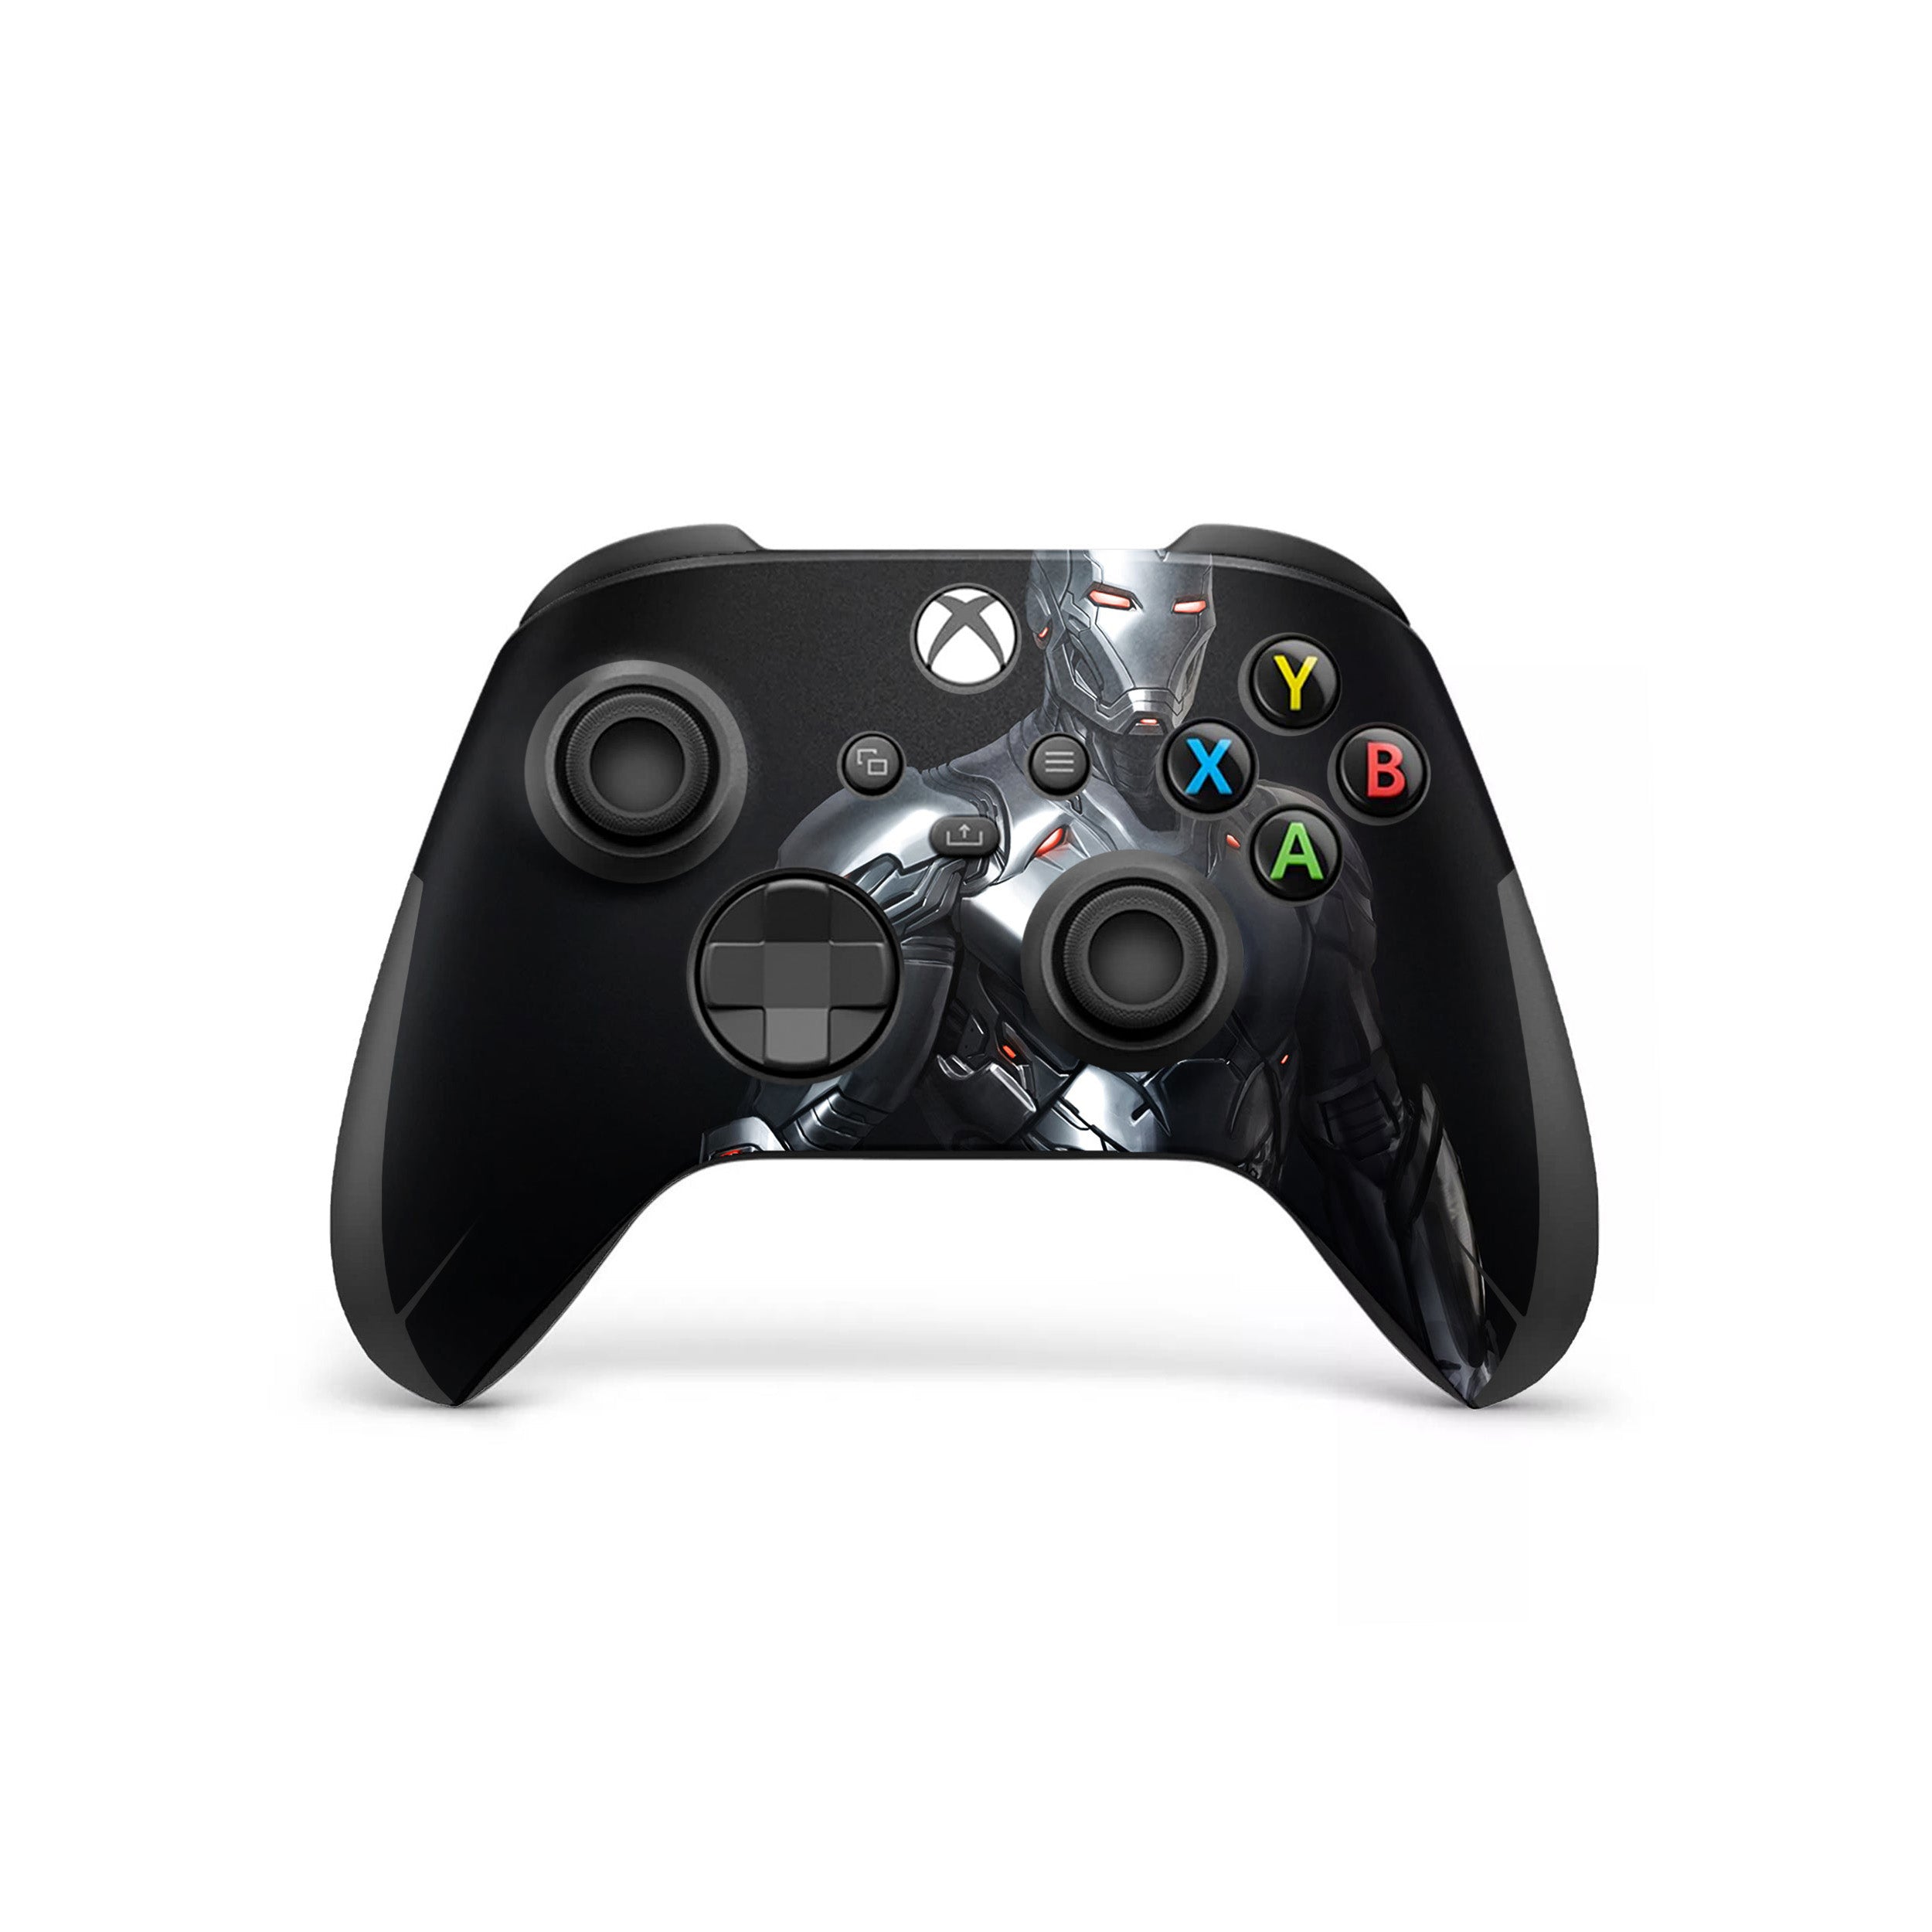 A video game skin featuring a Marvel Comics Iron Man design for the Xbox Wireless Controller.